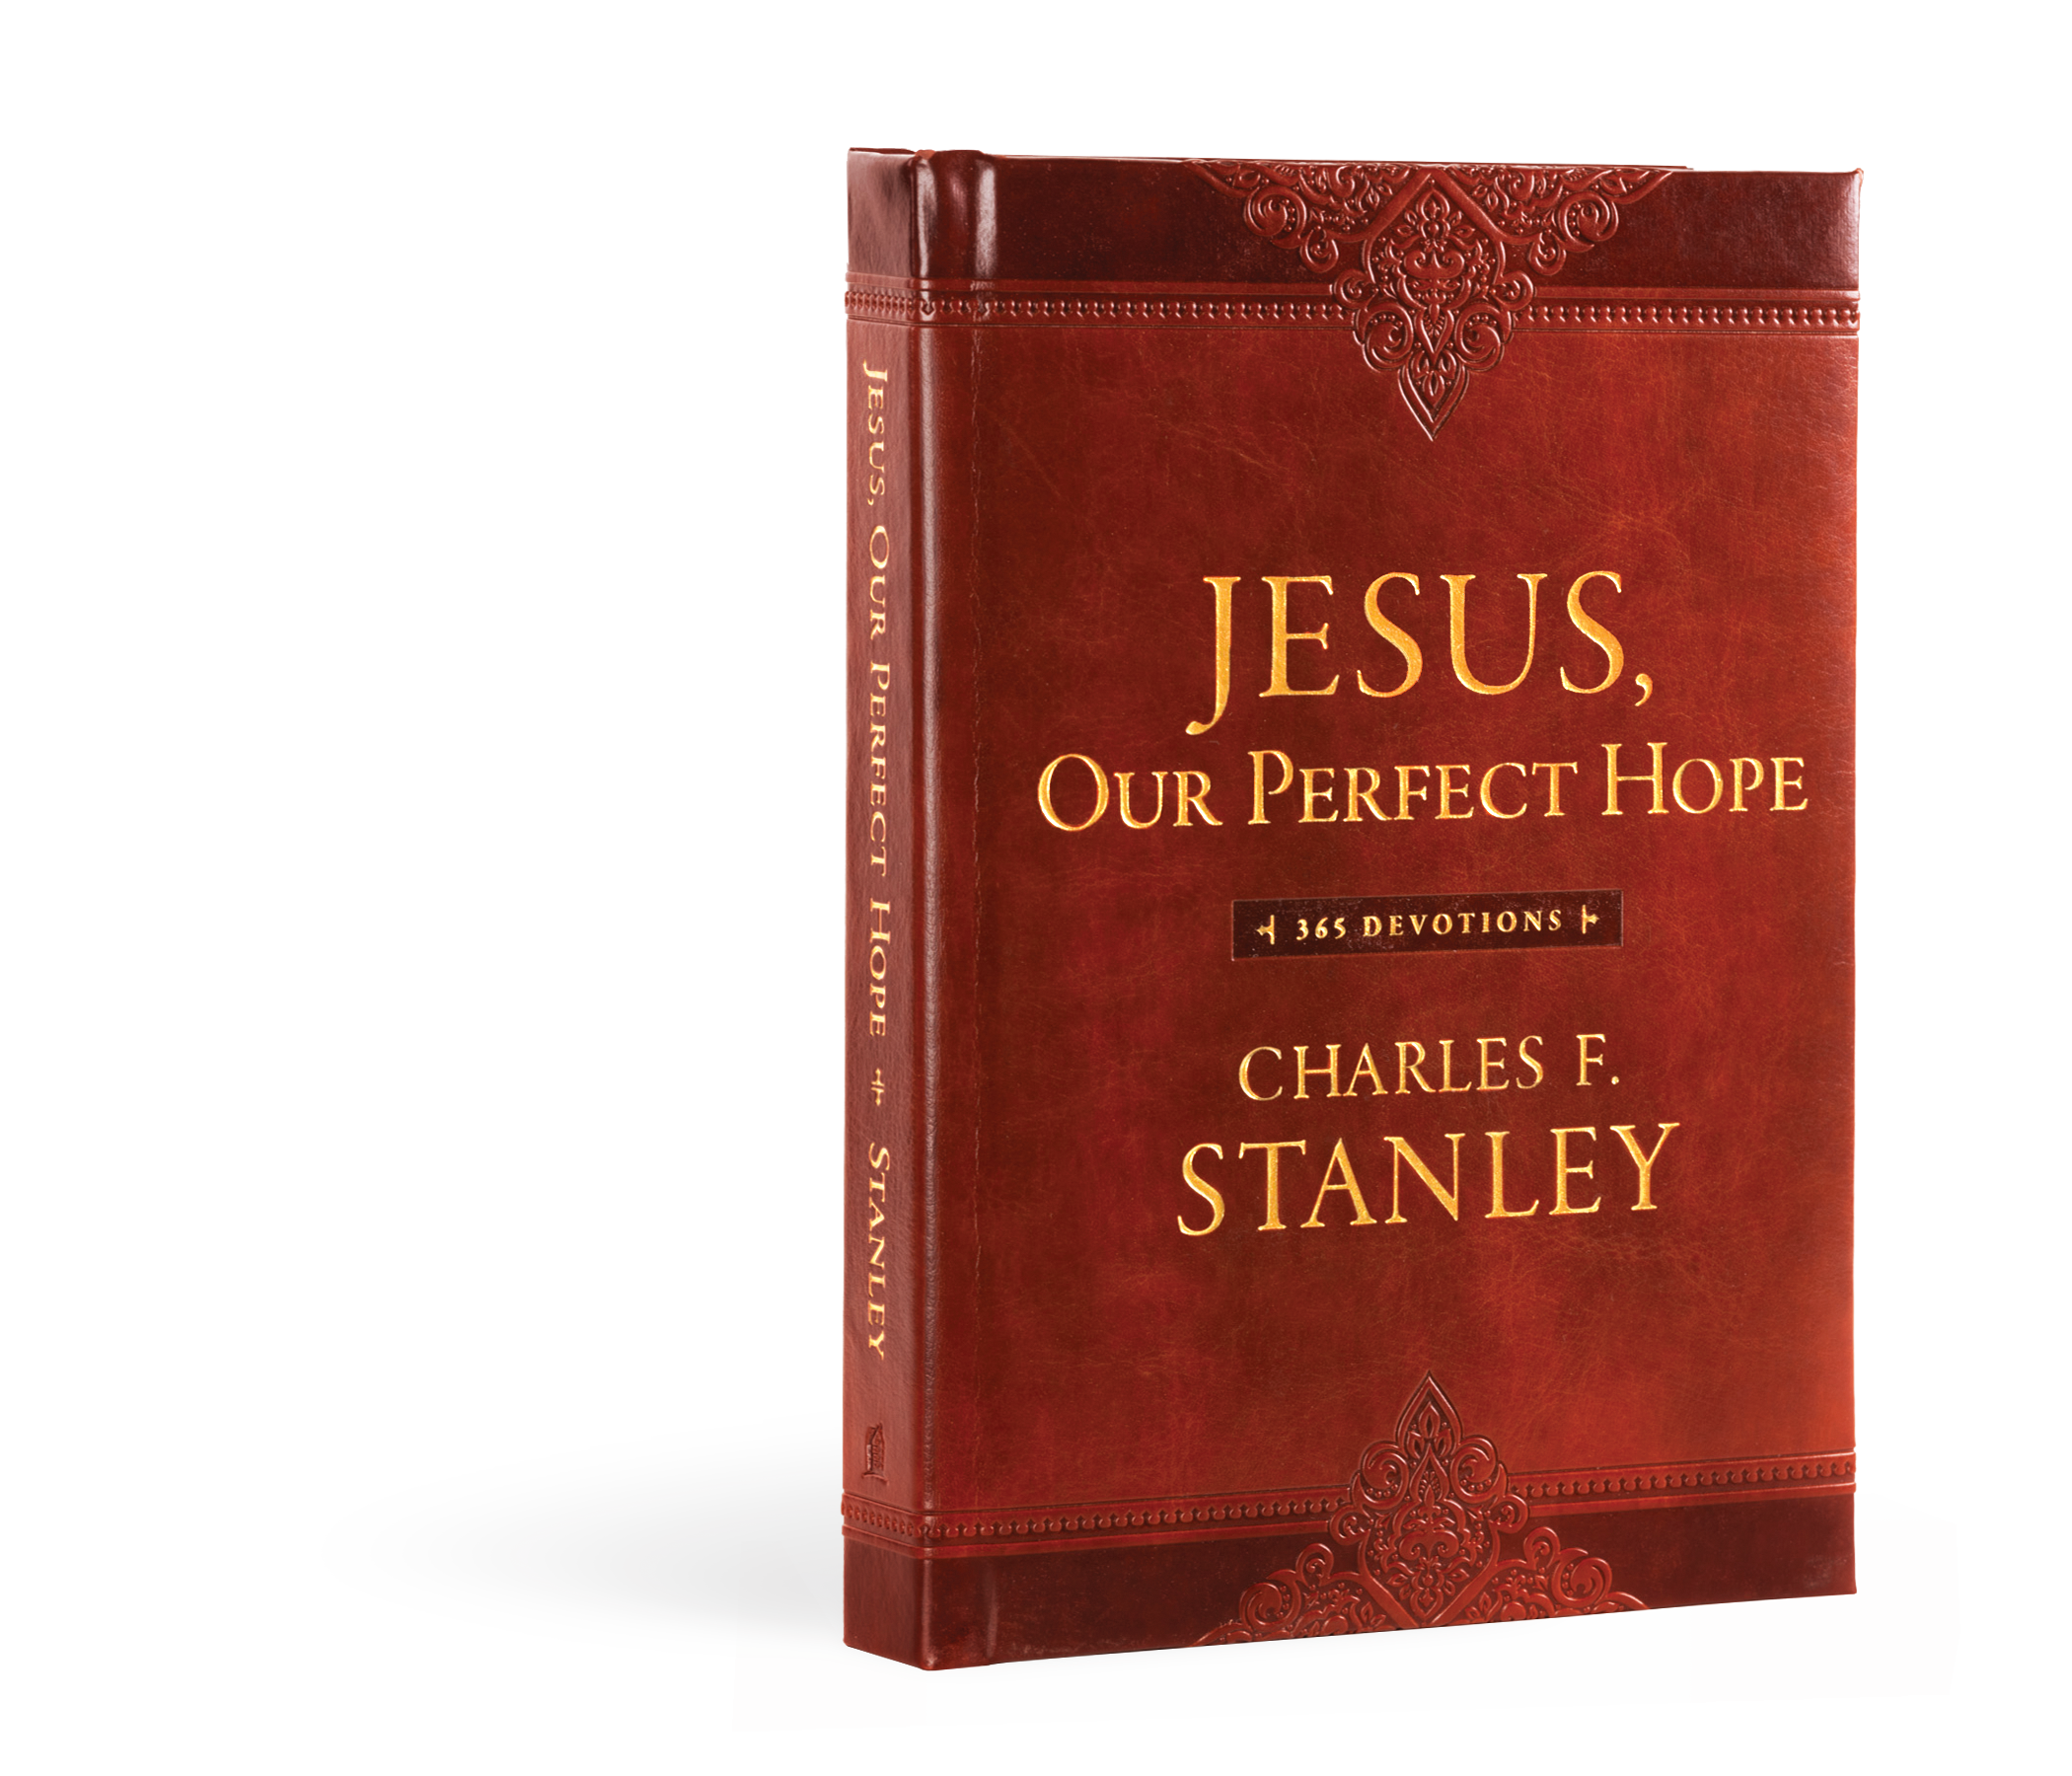 Receive Dr. Charles Stanley's Jesus, Our Perfect Hope from TBN